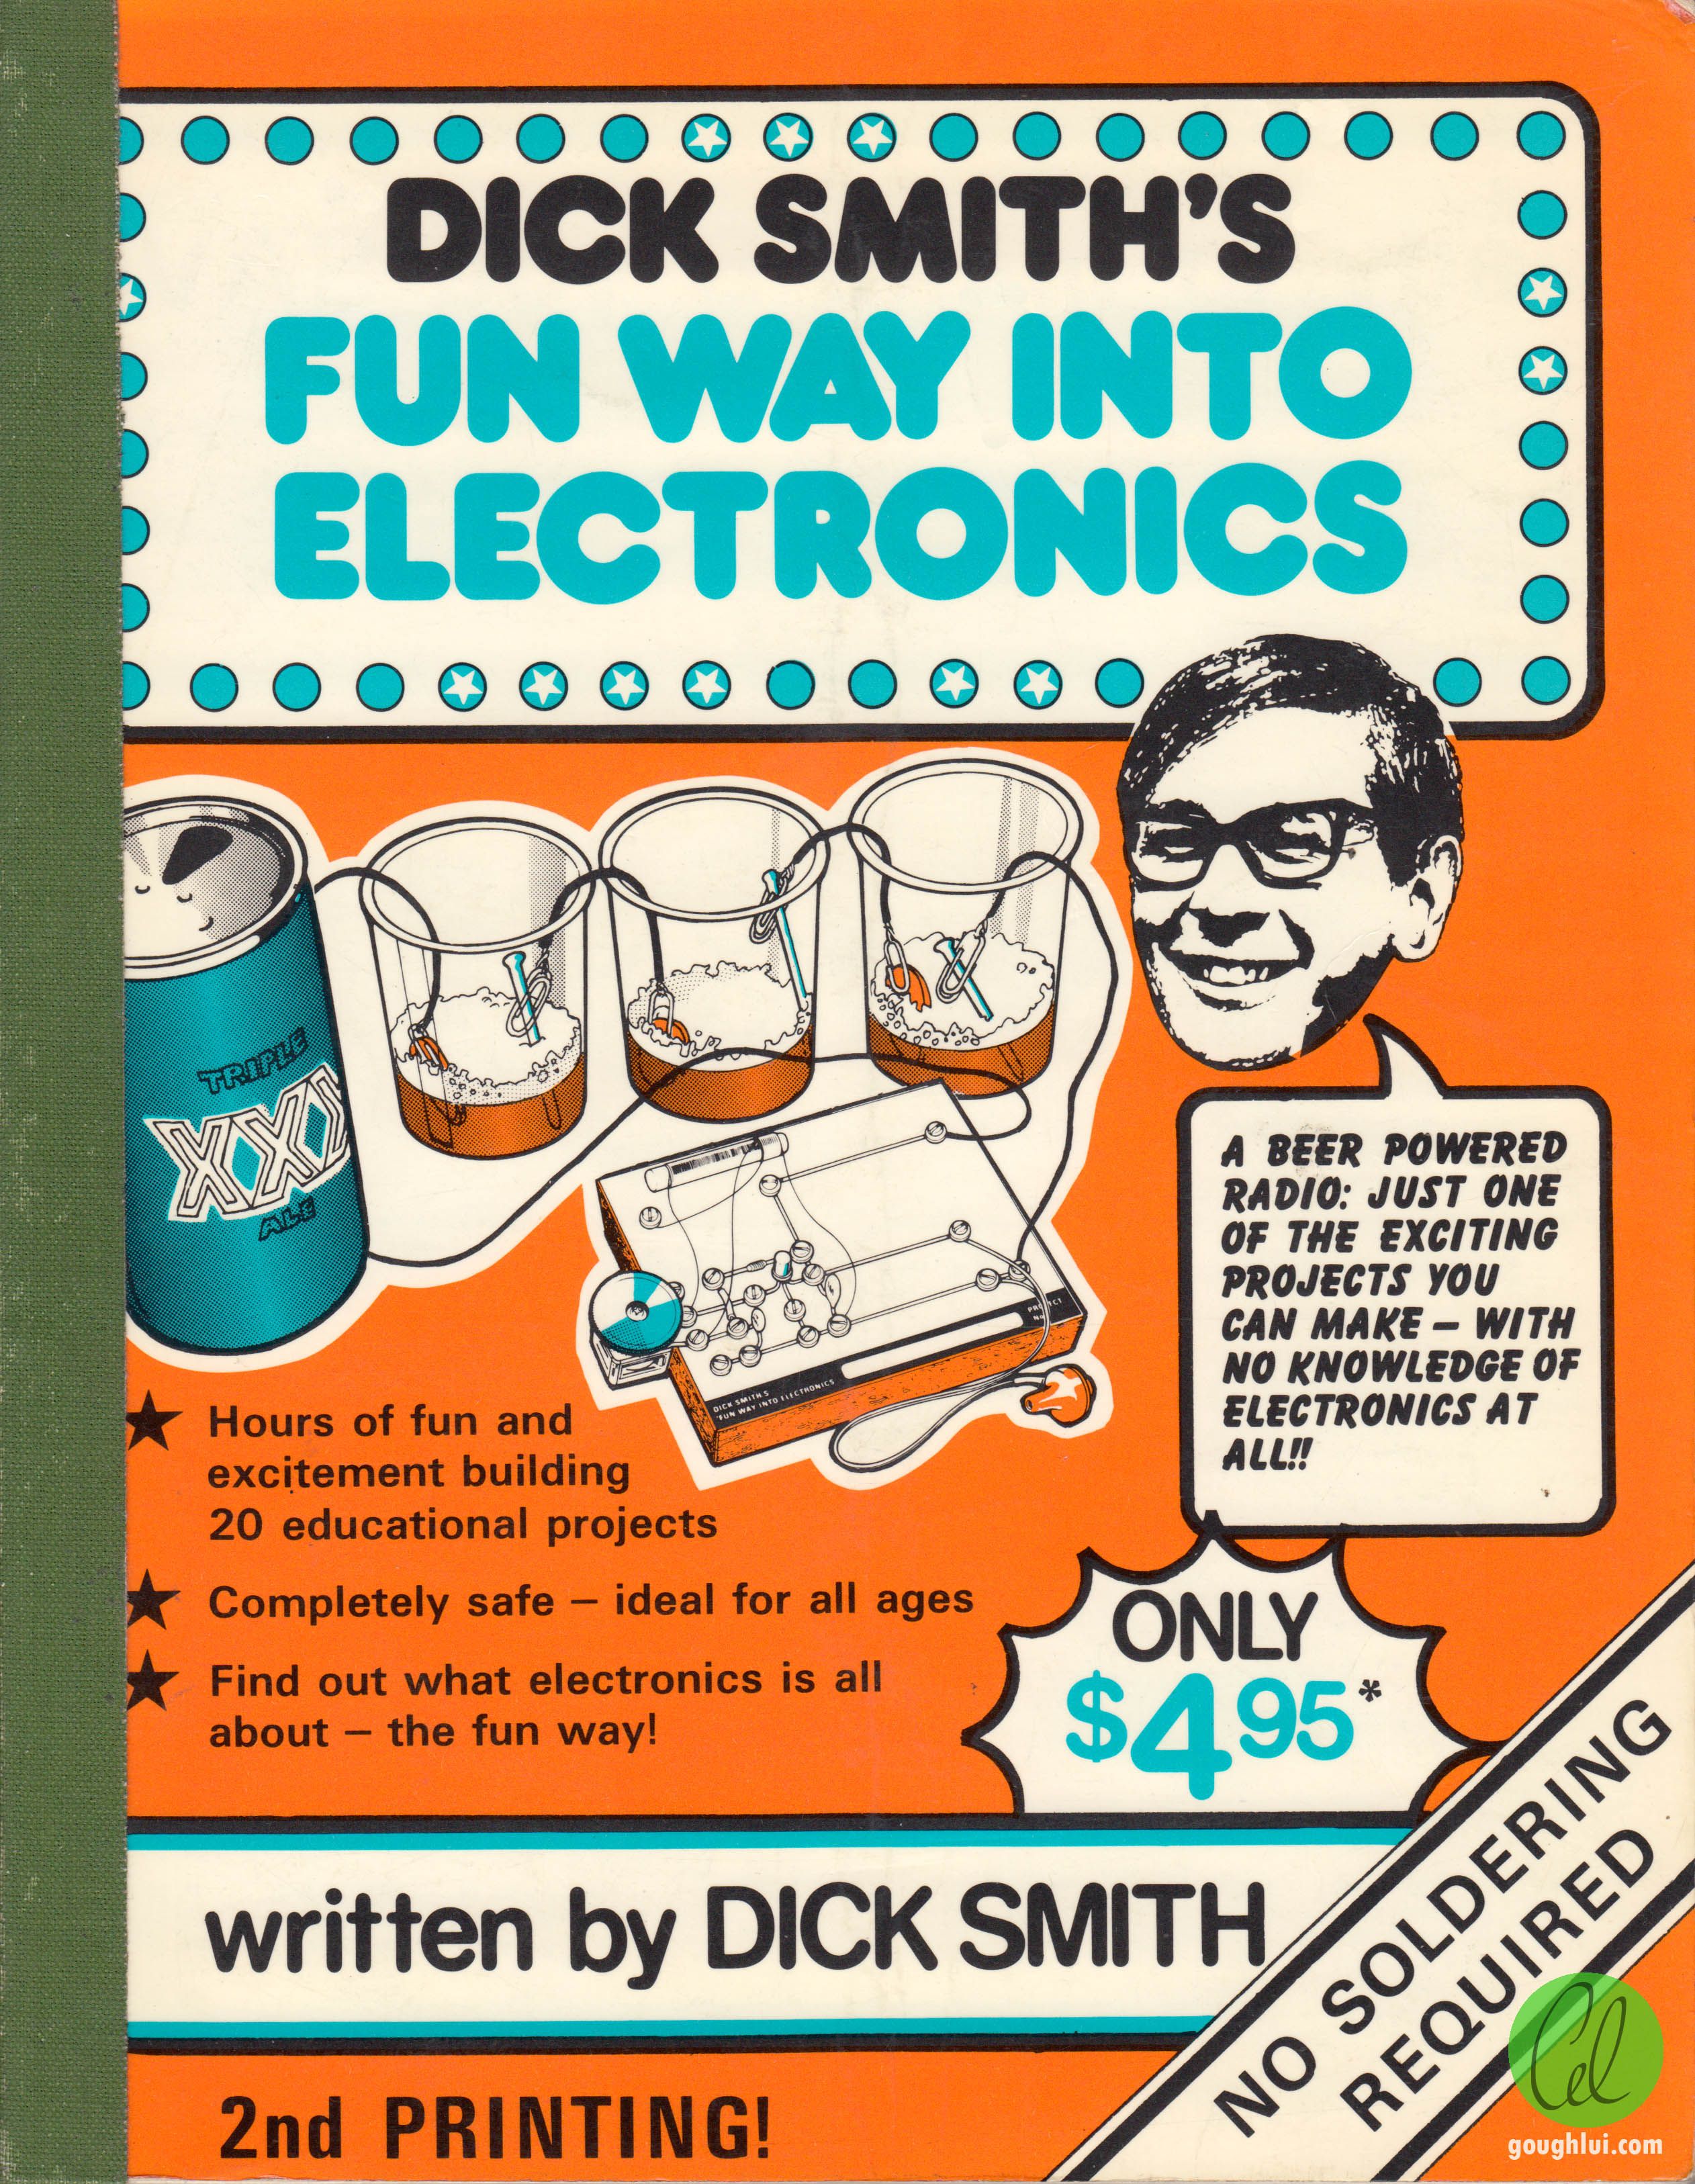 Dick electronic smith